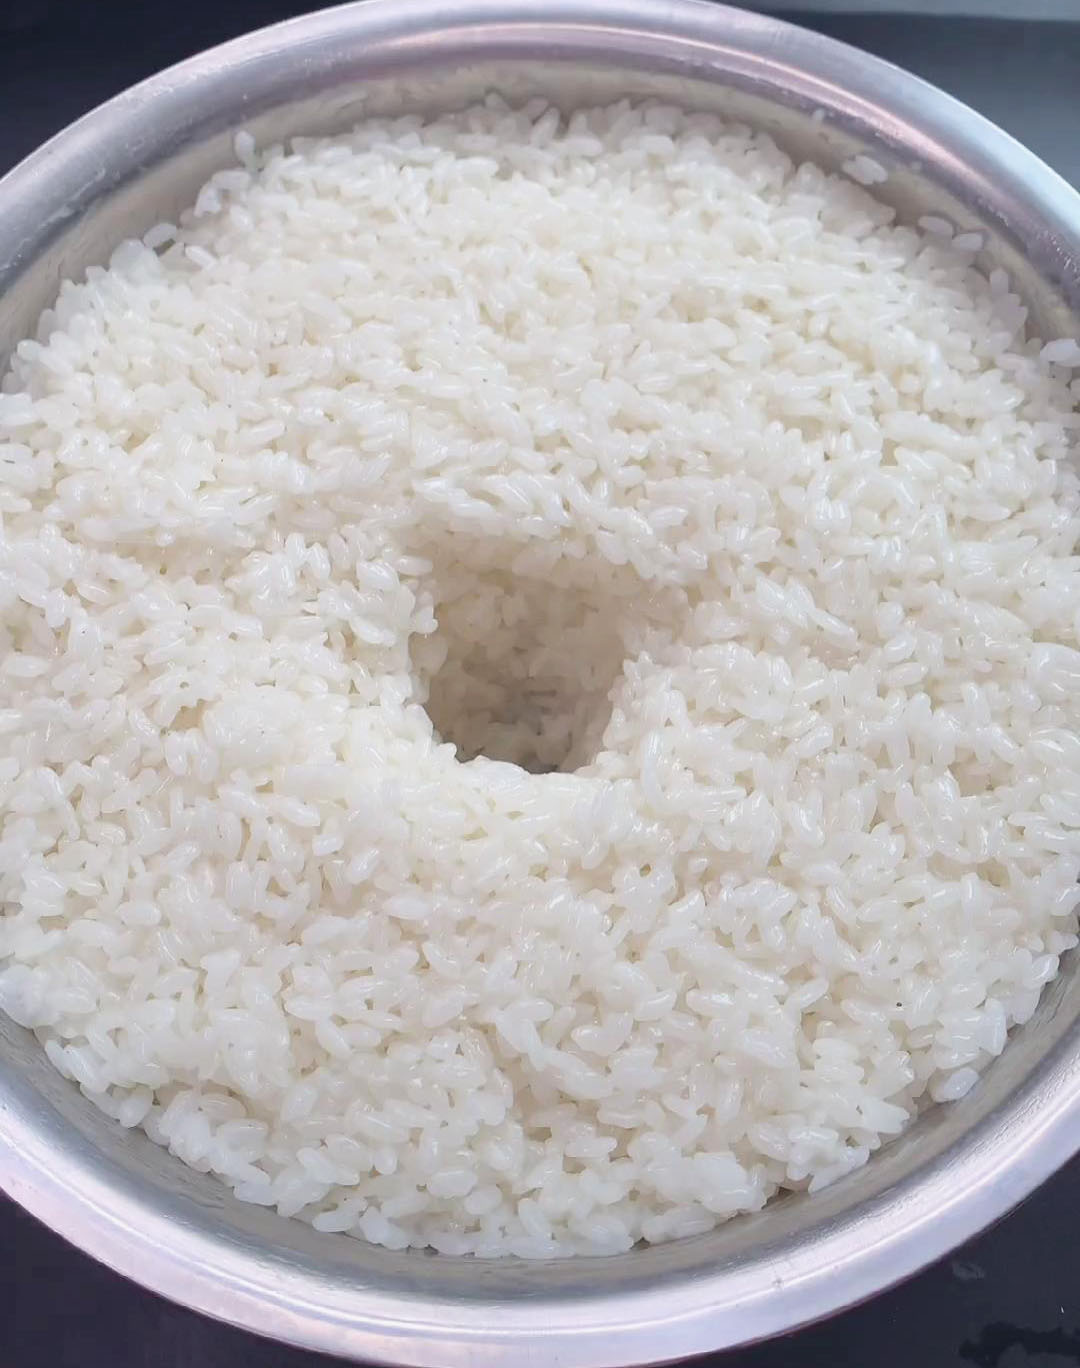 flatten the rice mixture, create a small hole in the middle